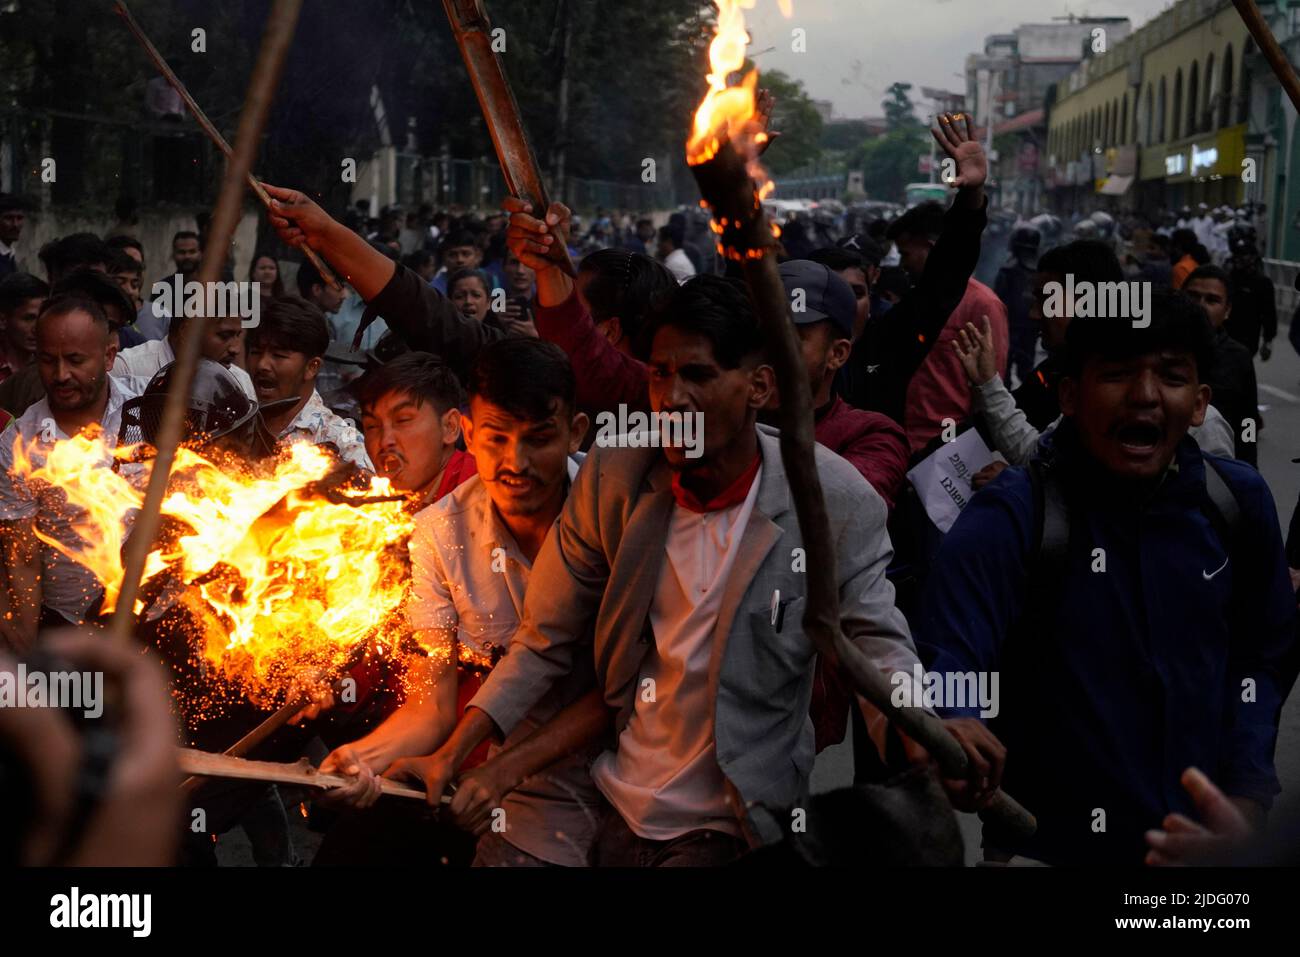 June 20, 2022, Kathmandu, Nepal: Holding burning torches, student protesters clash with Riot and Armed Police forces during a protest against the hike in fuel prices. The cost of gas in the Himalyan Kingdom increased to an all-time record high cost for gasoline, diesel, and kerosene with the new price per liter near Rs 200 (USD $1.60) in Kathmandu. (Credit Image: © Skanda Gautam/ZUMA Press Wire) Stock Photo